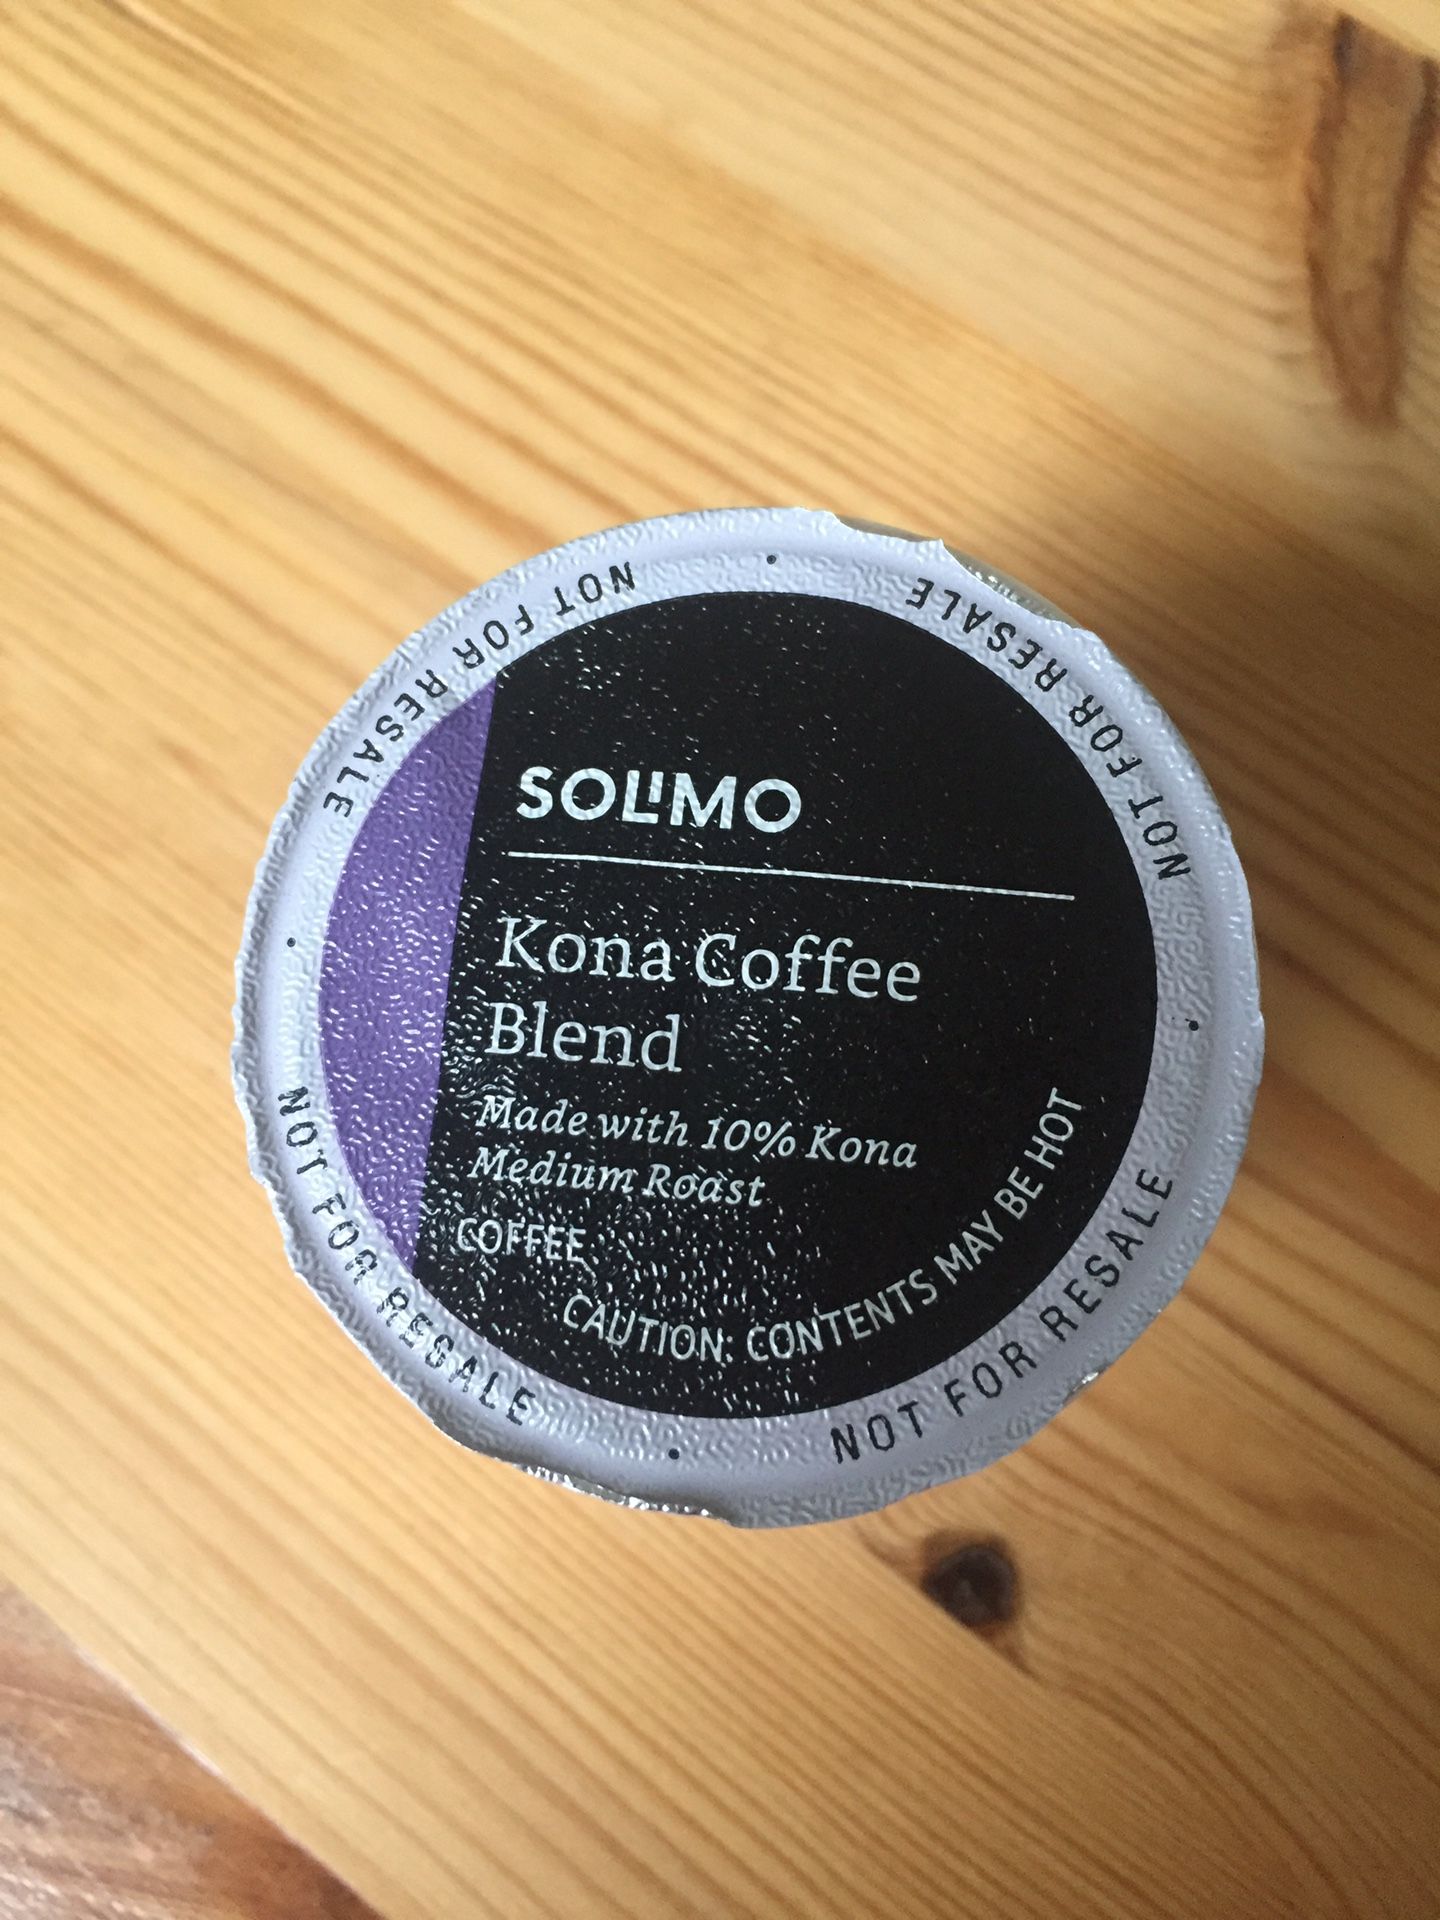 Solimo Medium Roast Coffee Pods, Kona Blend, Compatible with Keurig 2.0 K-Cup Brewers